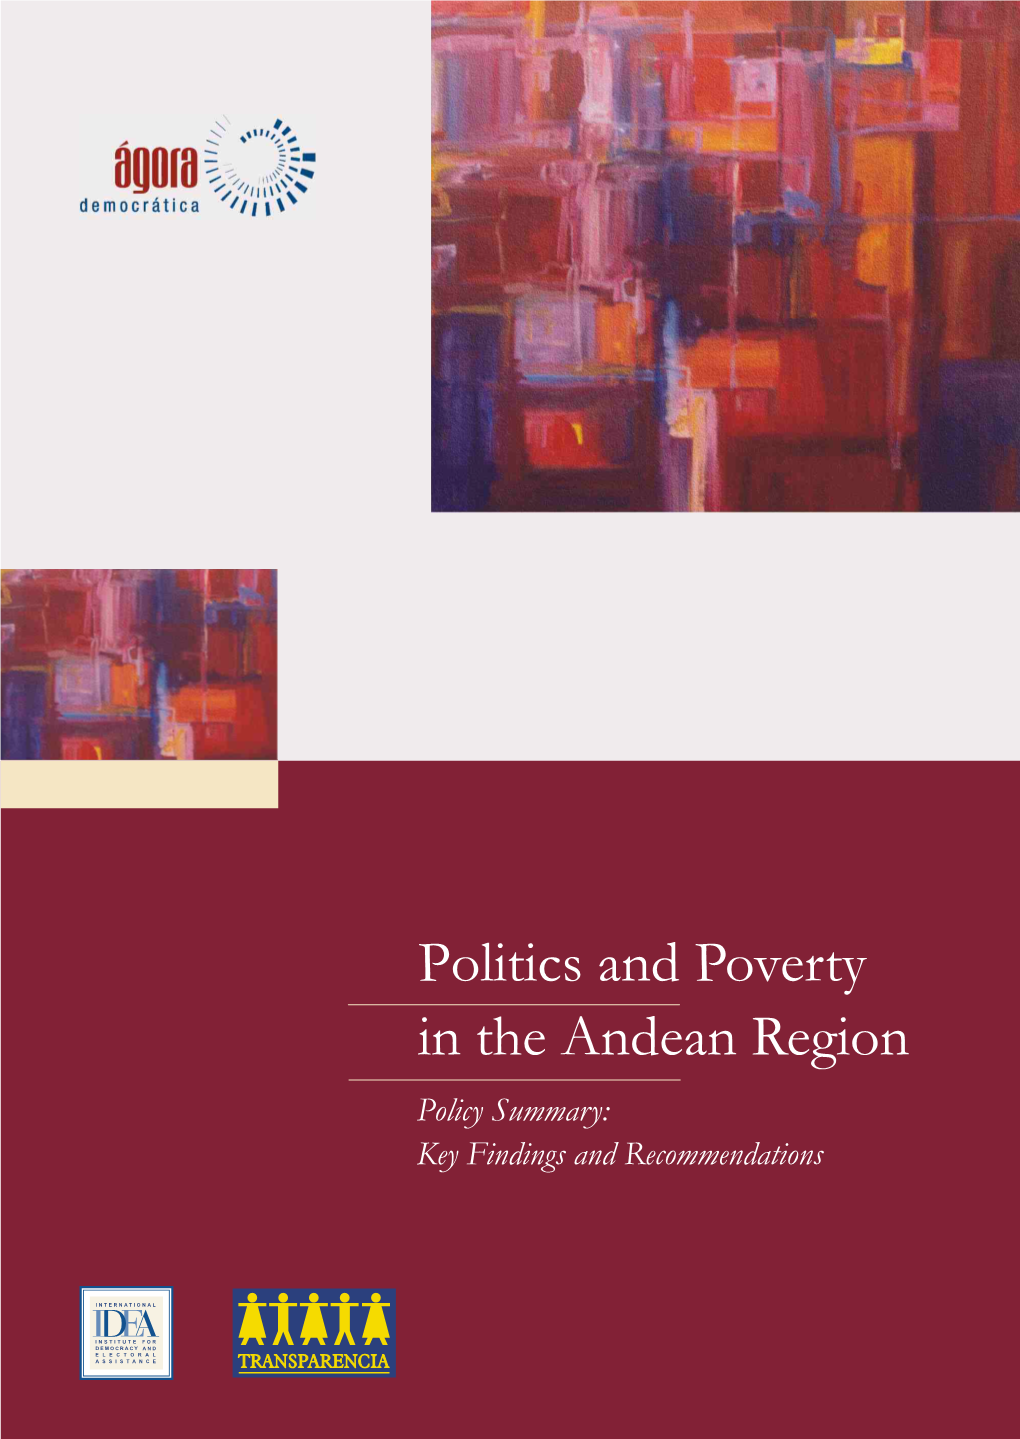 Politics and Poverty in the Andean Region